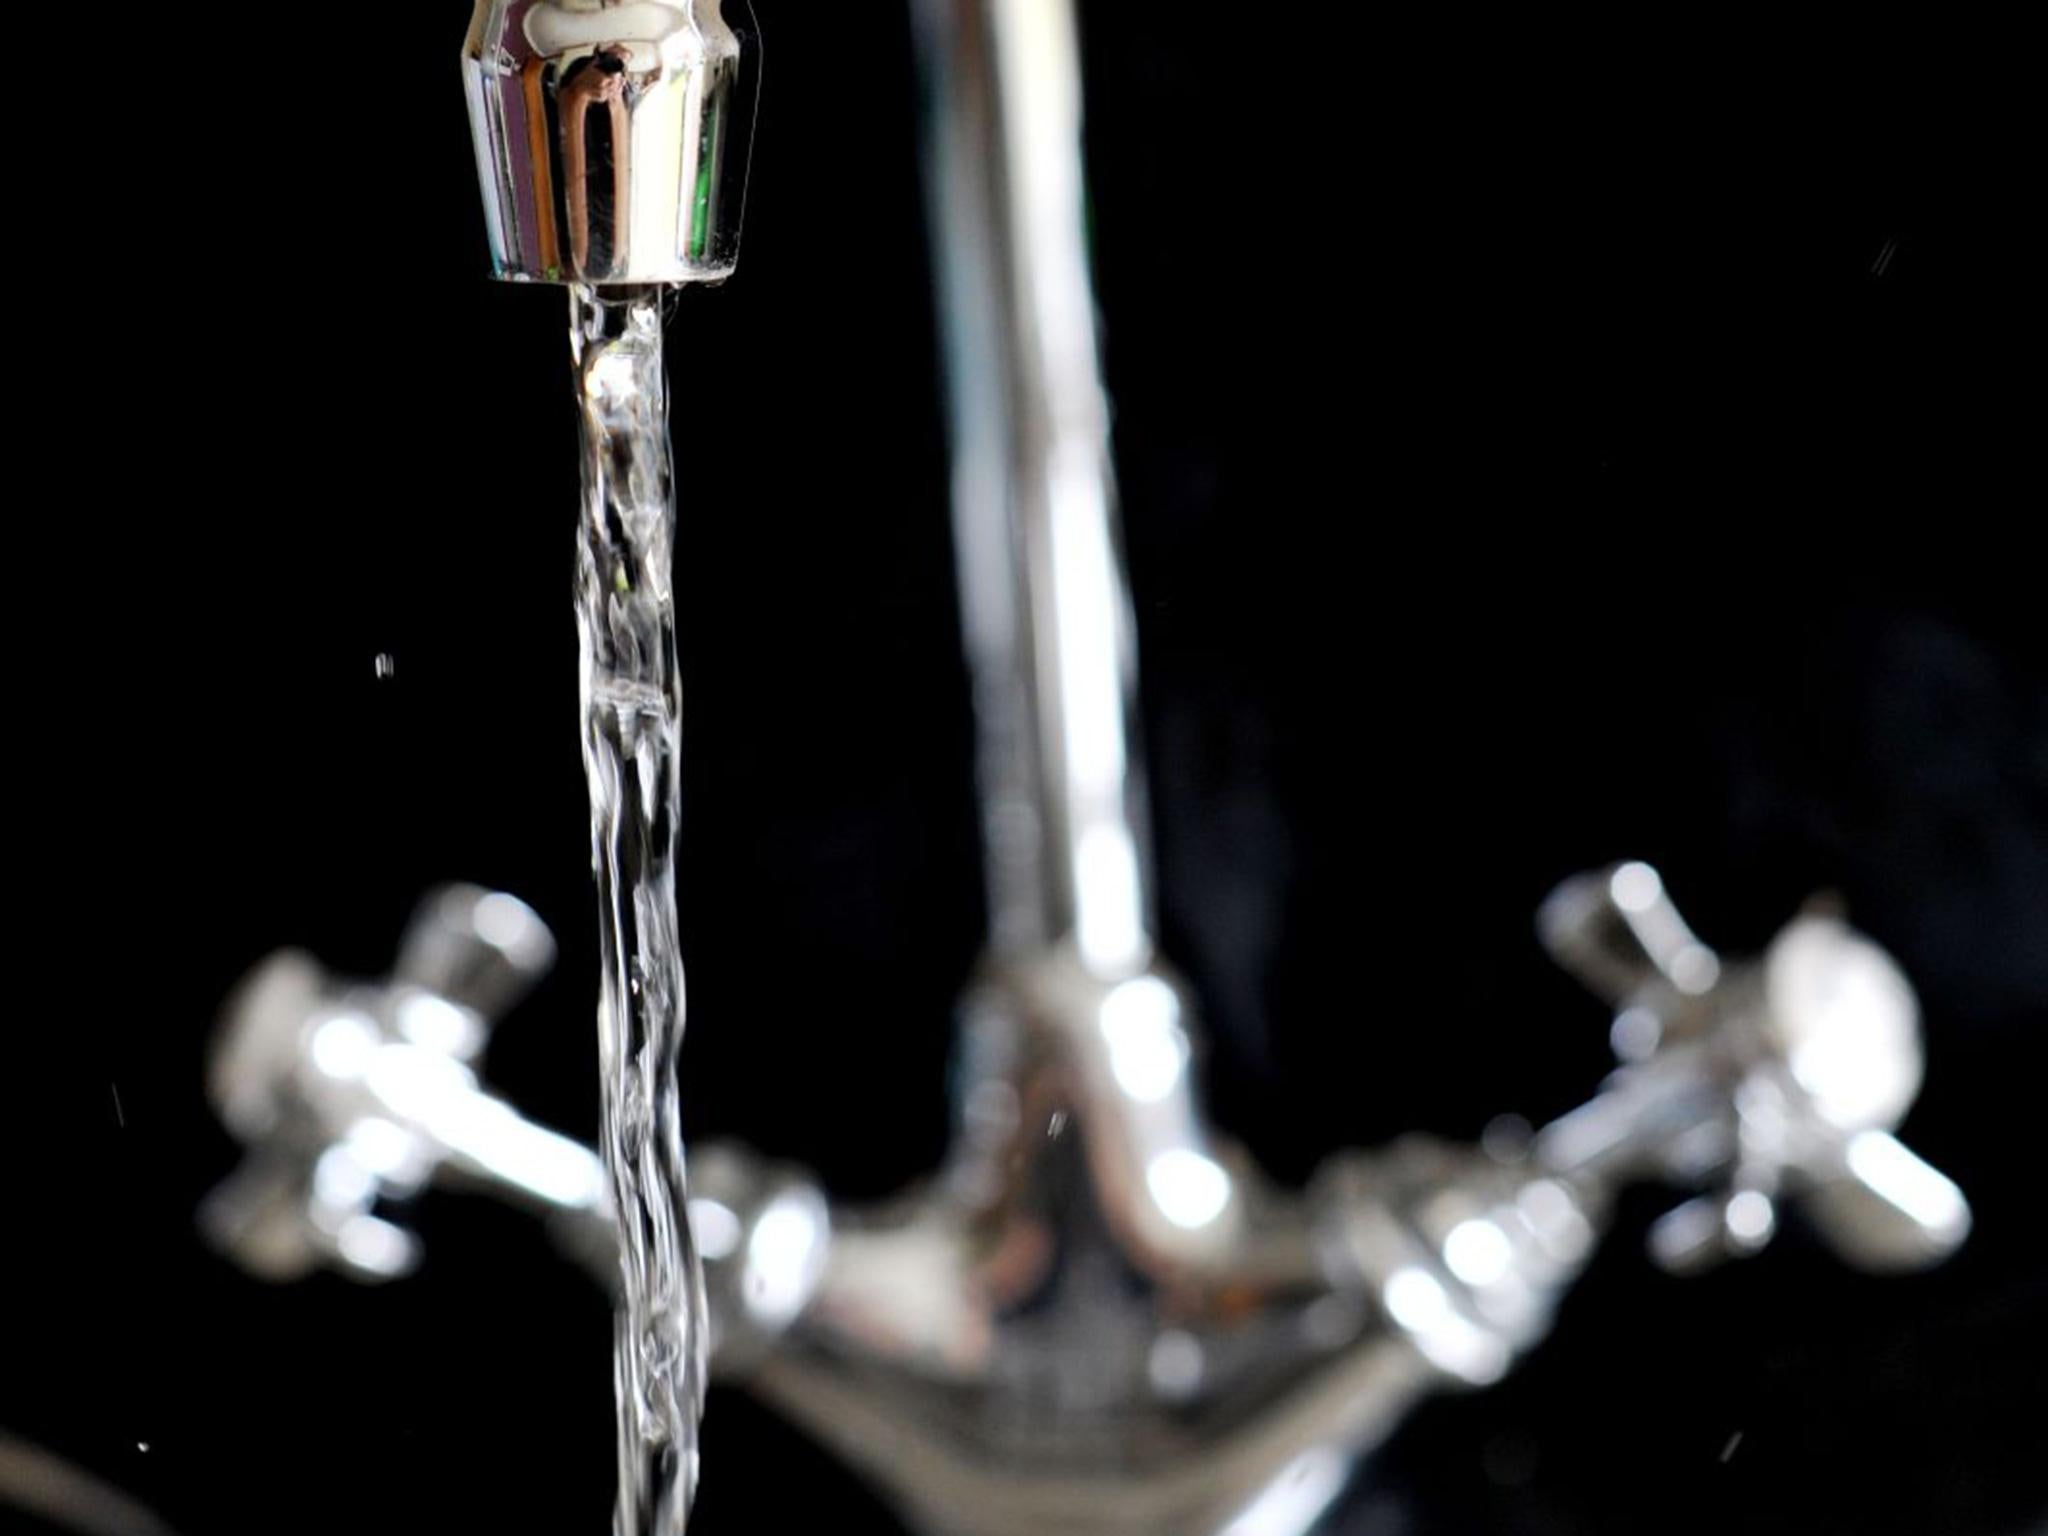 Residents in North Somerset are being told to boil their tap water before use